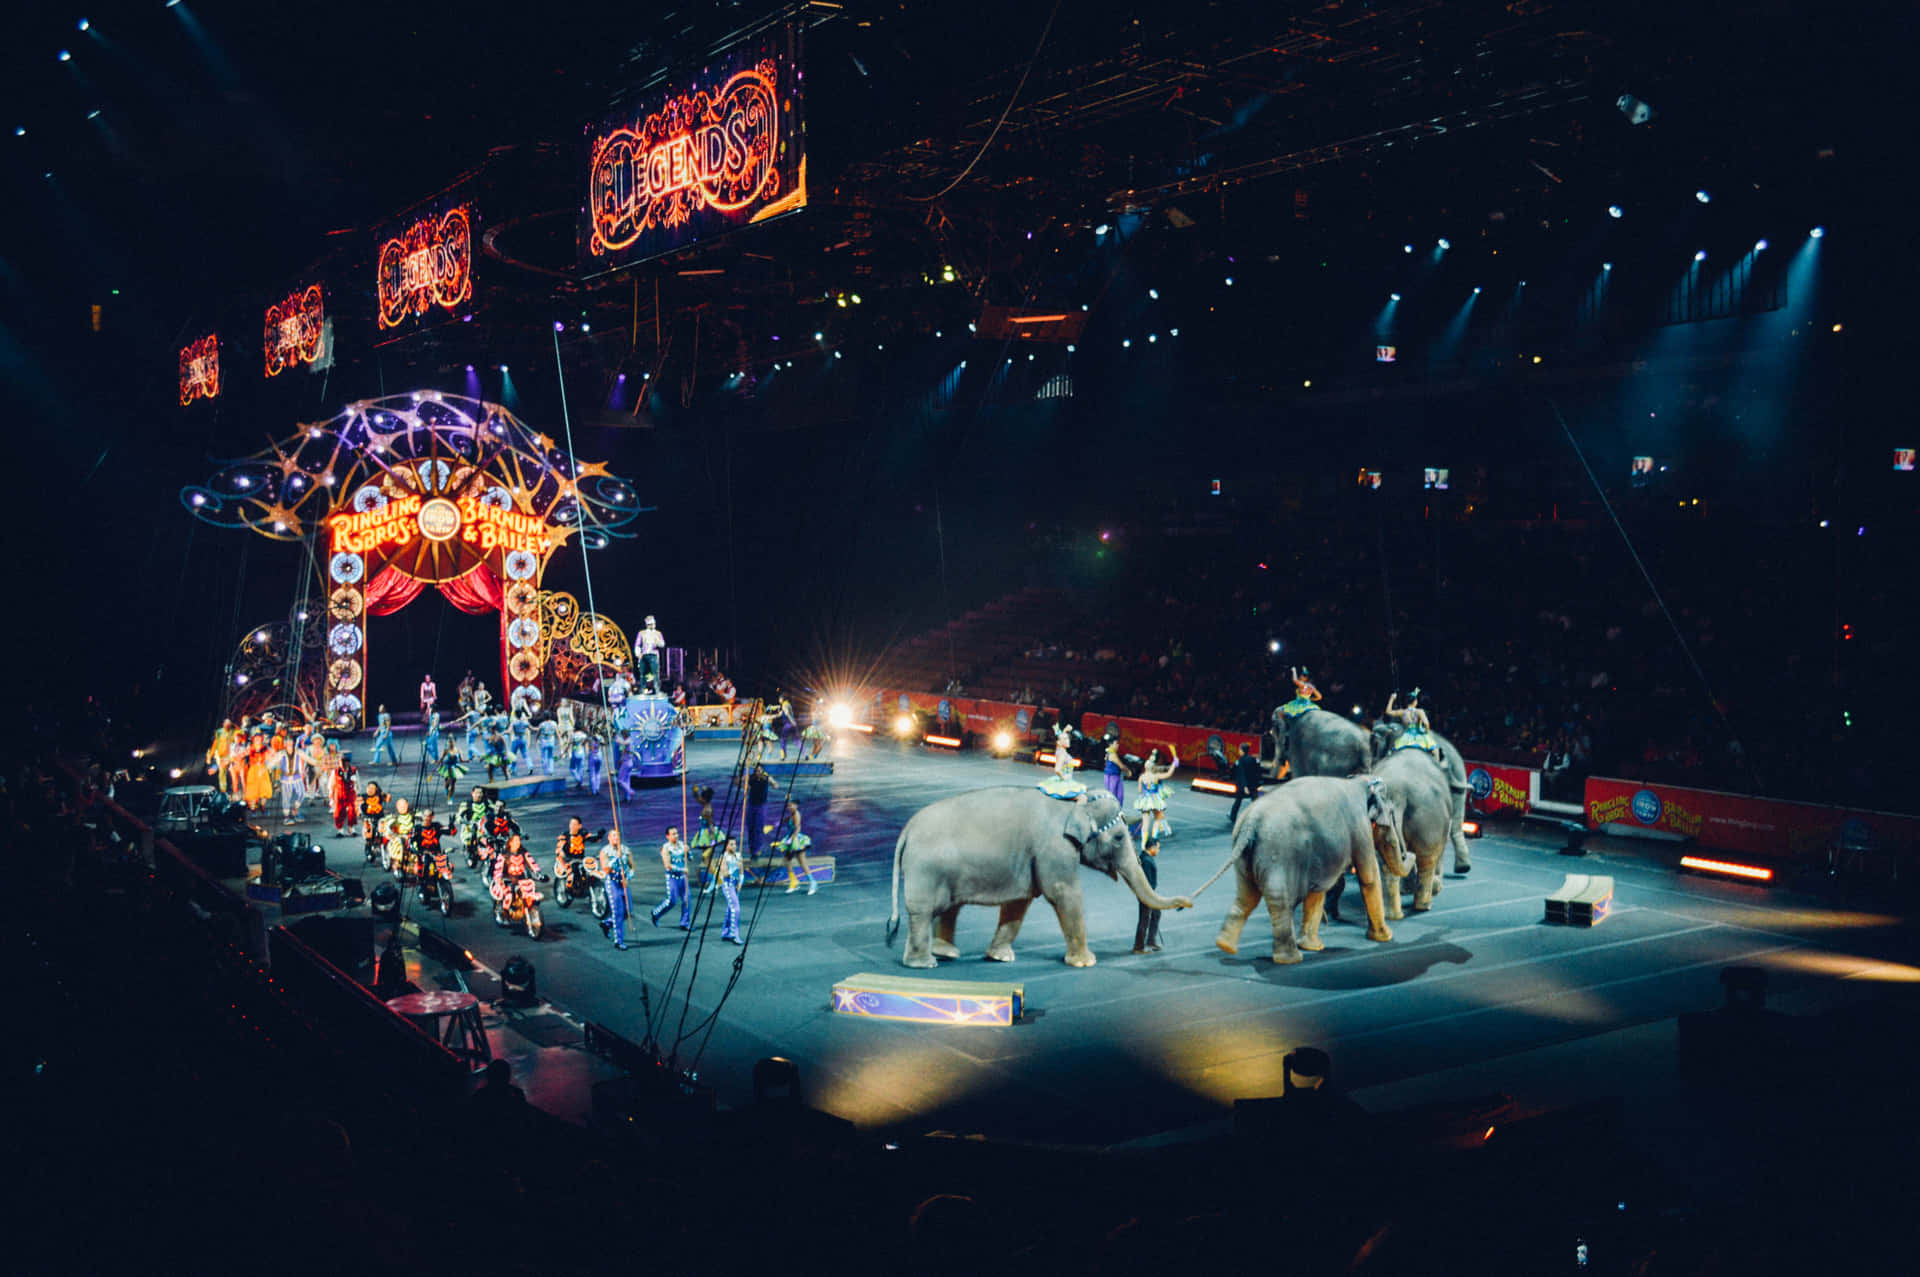 A Spectacular Collection of Talent at the Circus